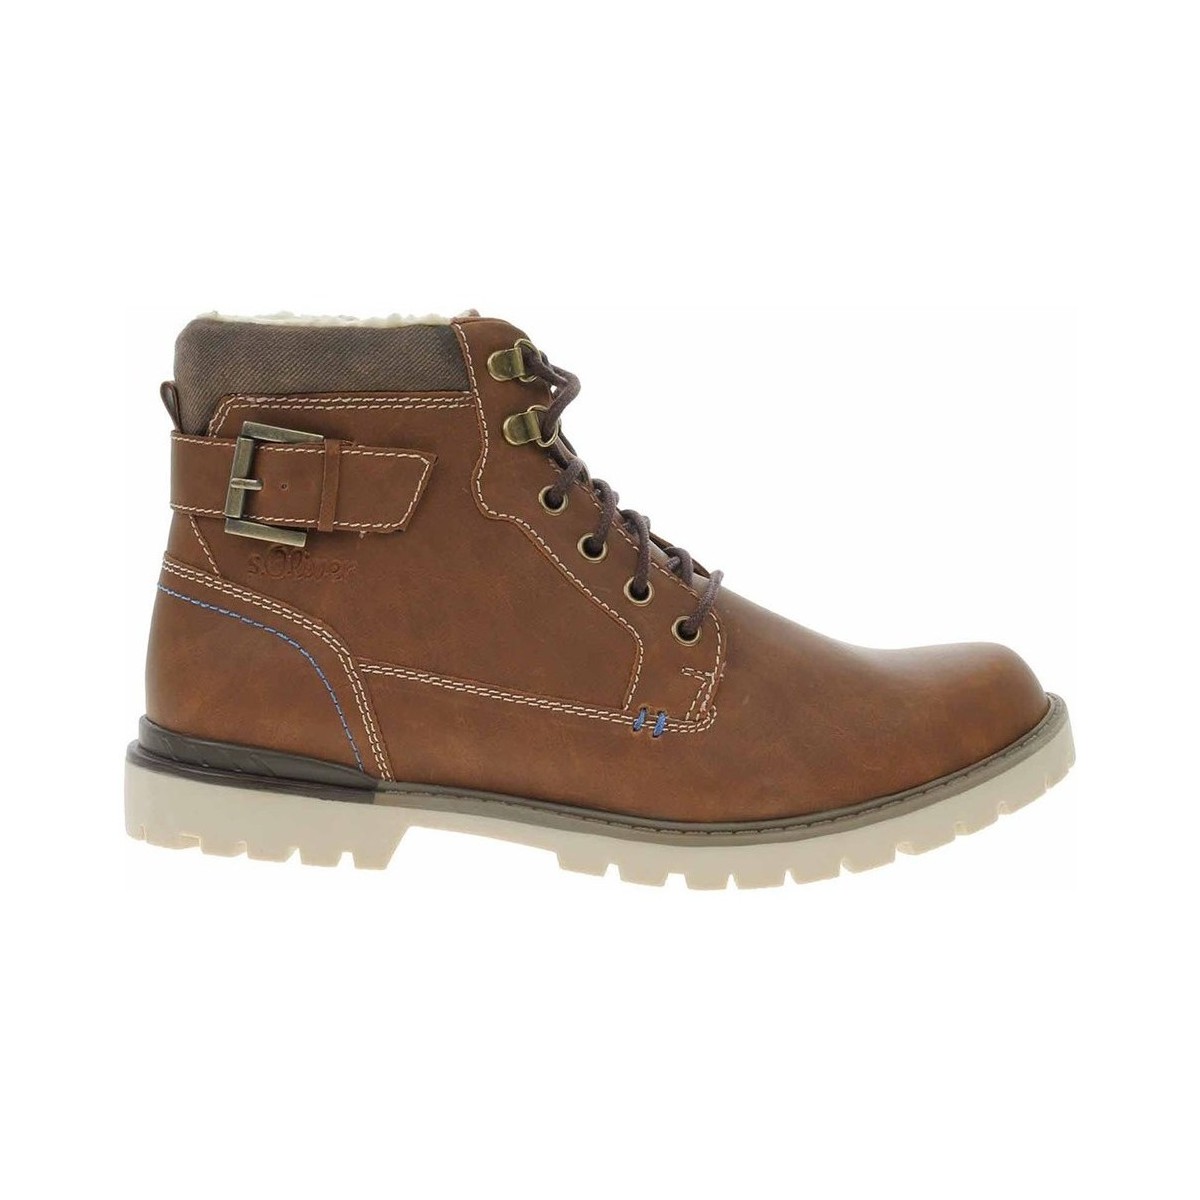 Chaussures Homme Boots S.Oliver 551625329305 Marron